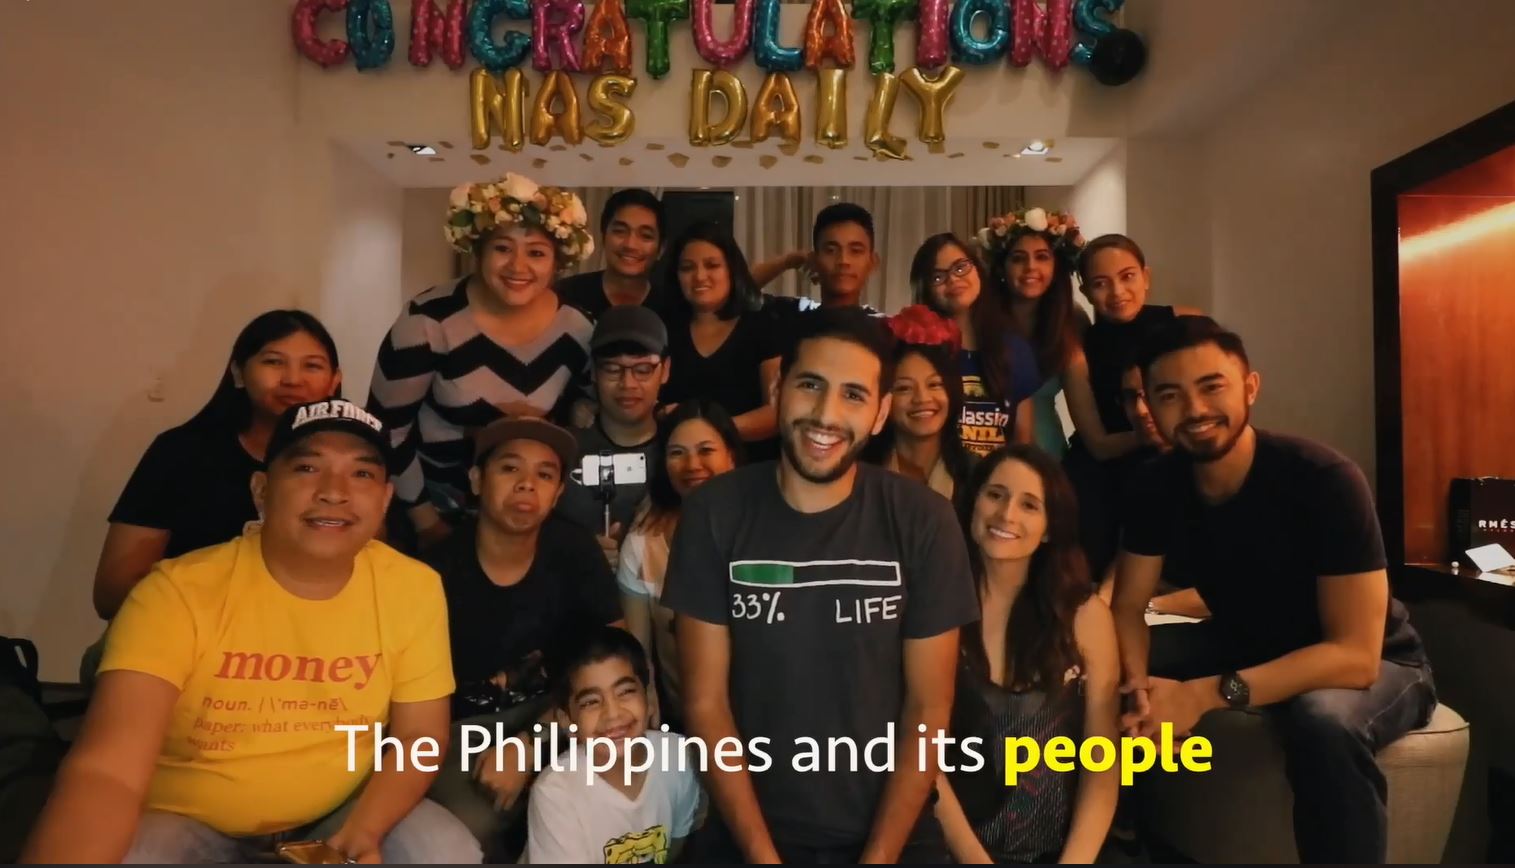 Nas daily philippines